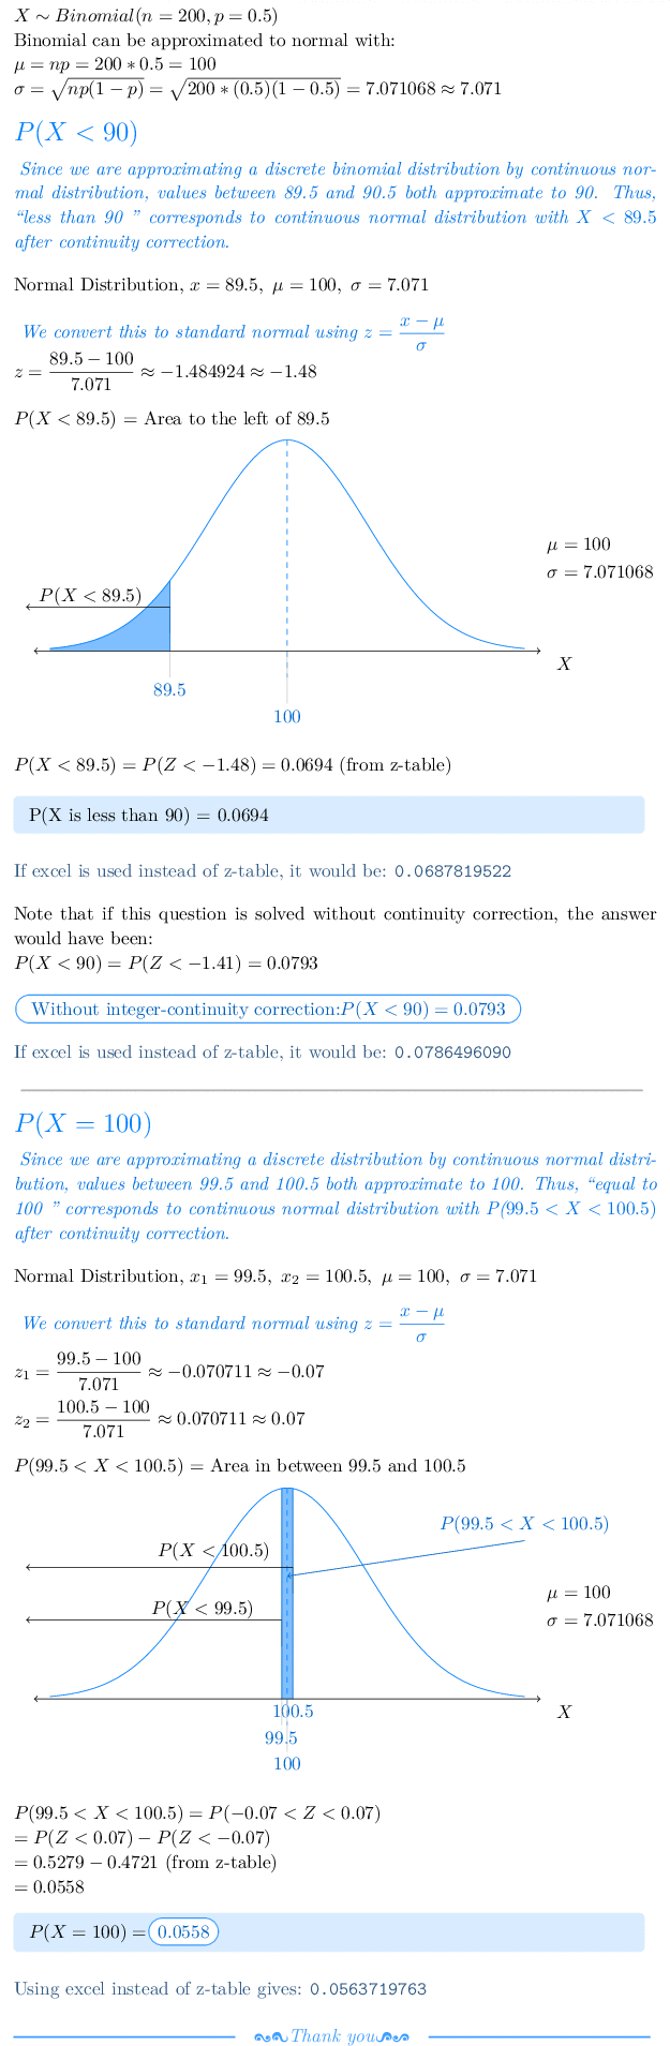 X~Binomial(n -200, p 0.5) Binomial can be approximated to normal with: µ-np = 200 * 0.5 100 s? yMp(1-p-V200 * (0.5) (1-0.5) =